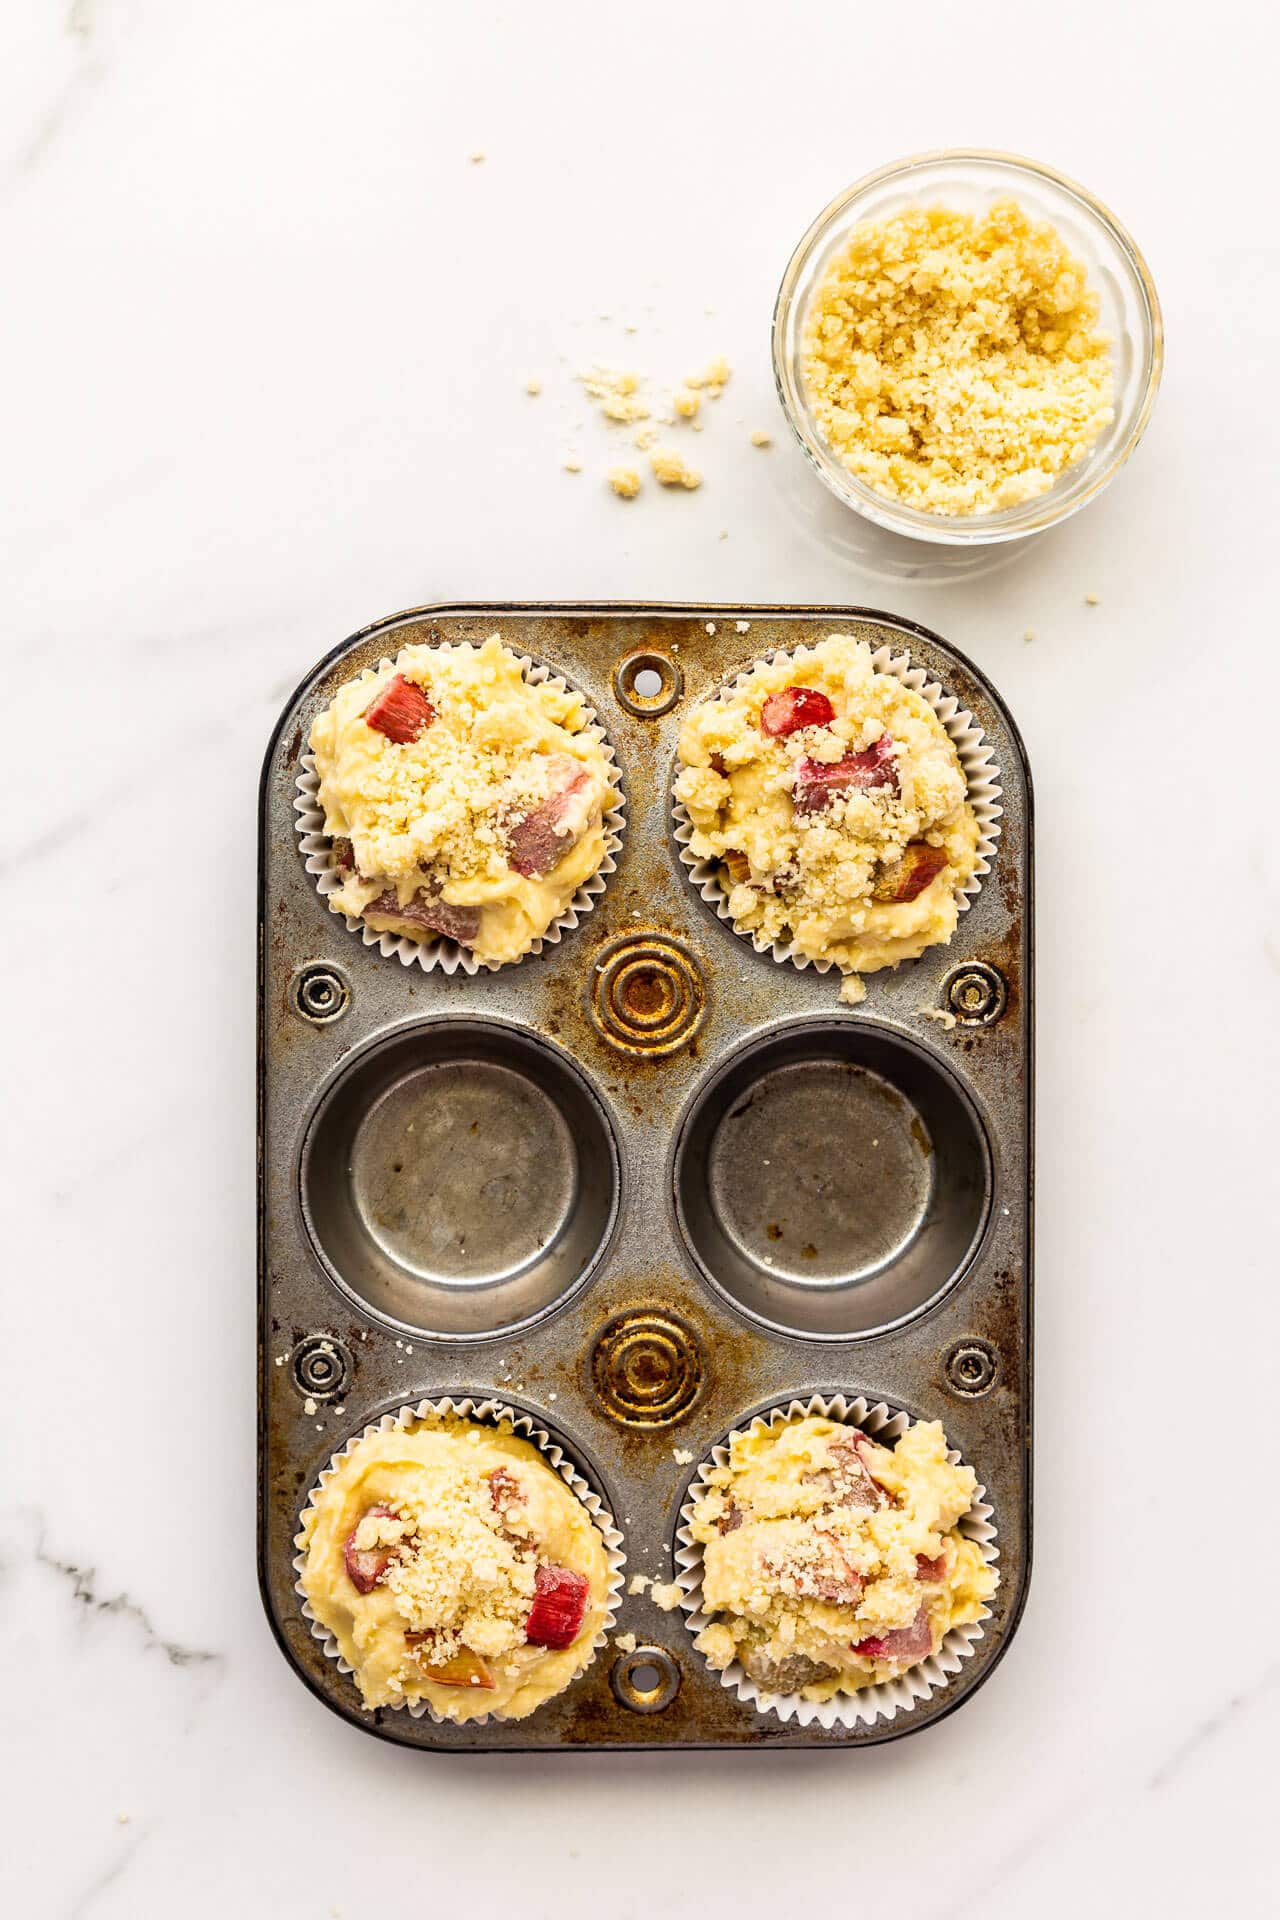 Rhubarb muffins with streusel topping crumbled on top before baking in a vintage muffin pan